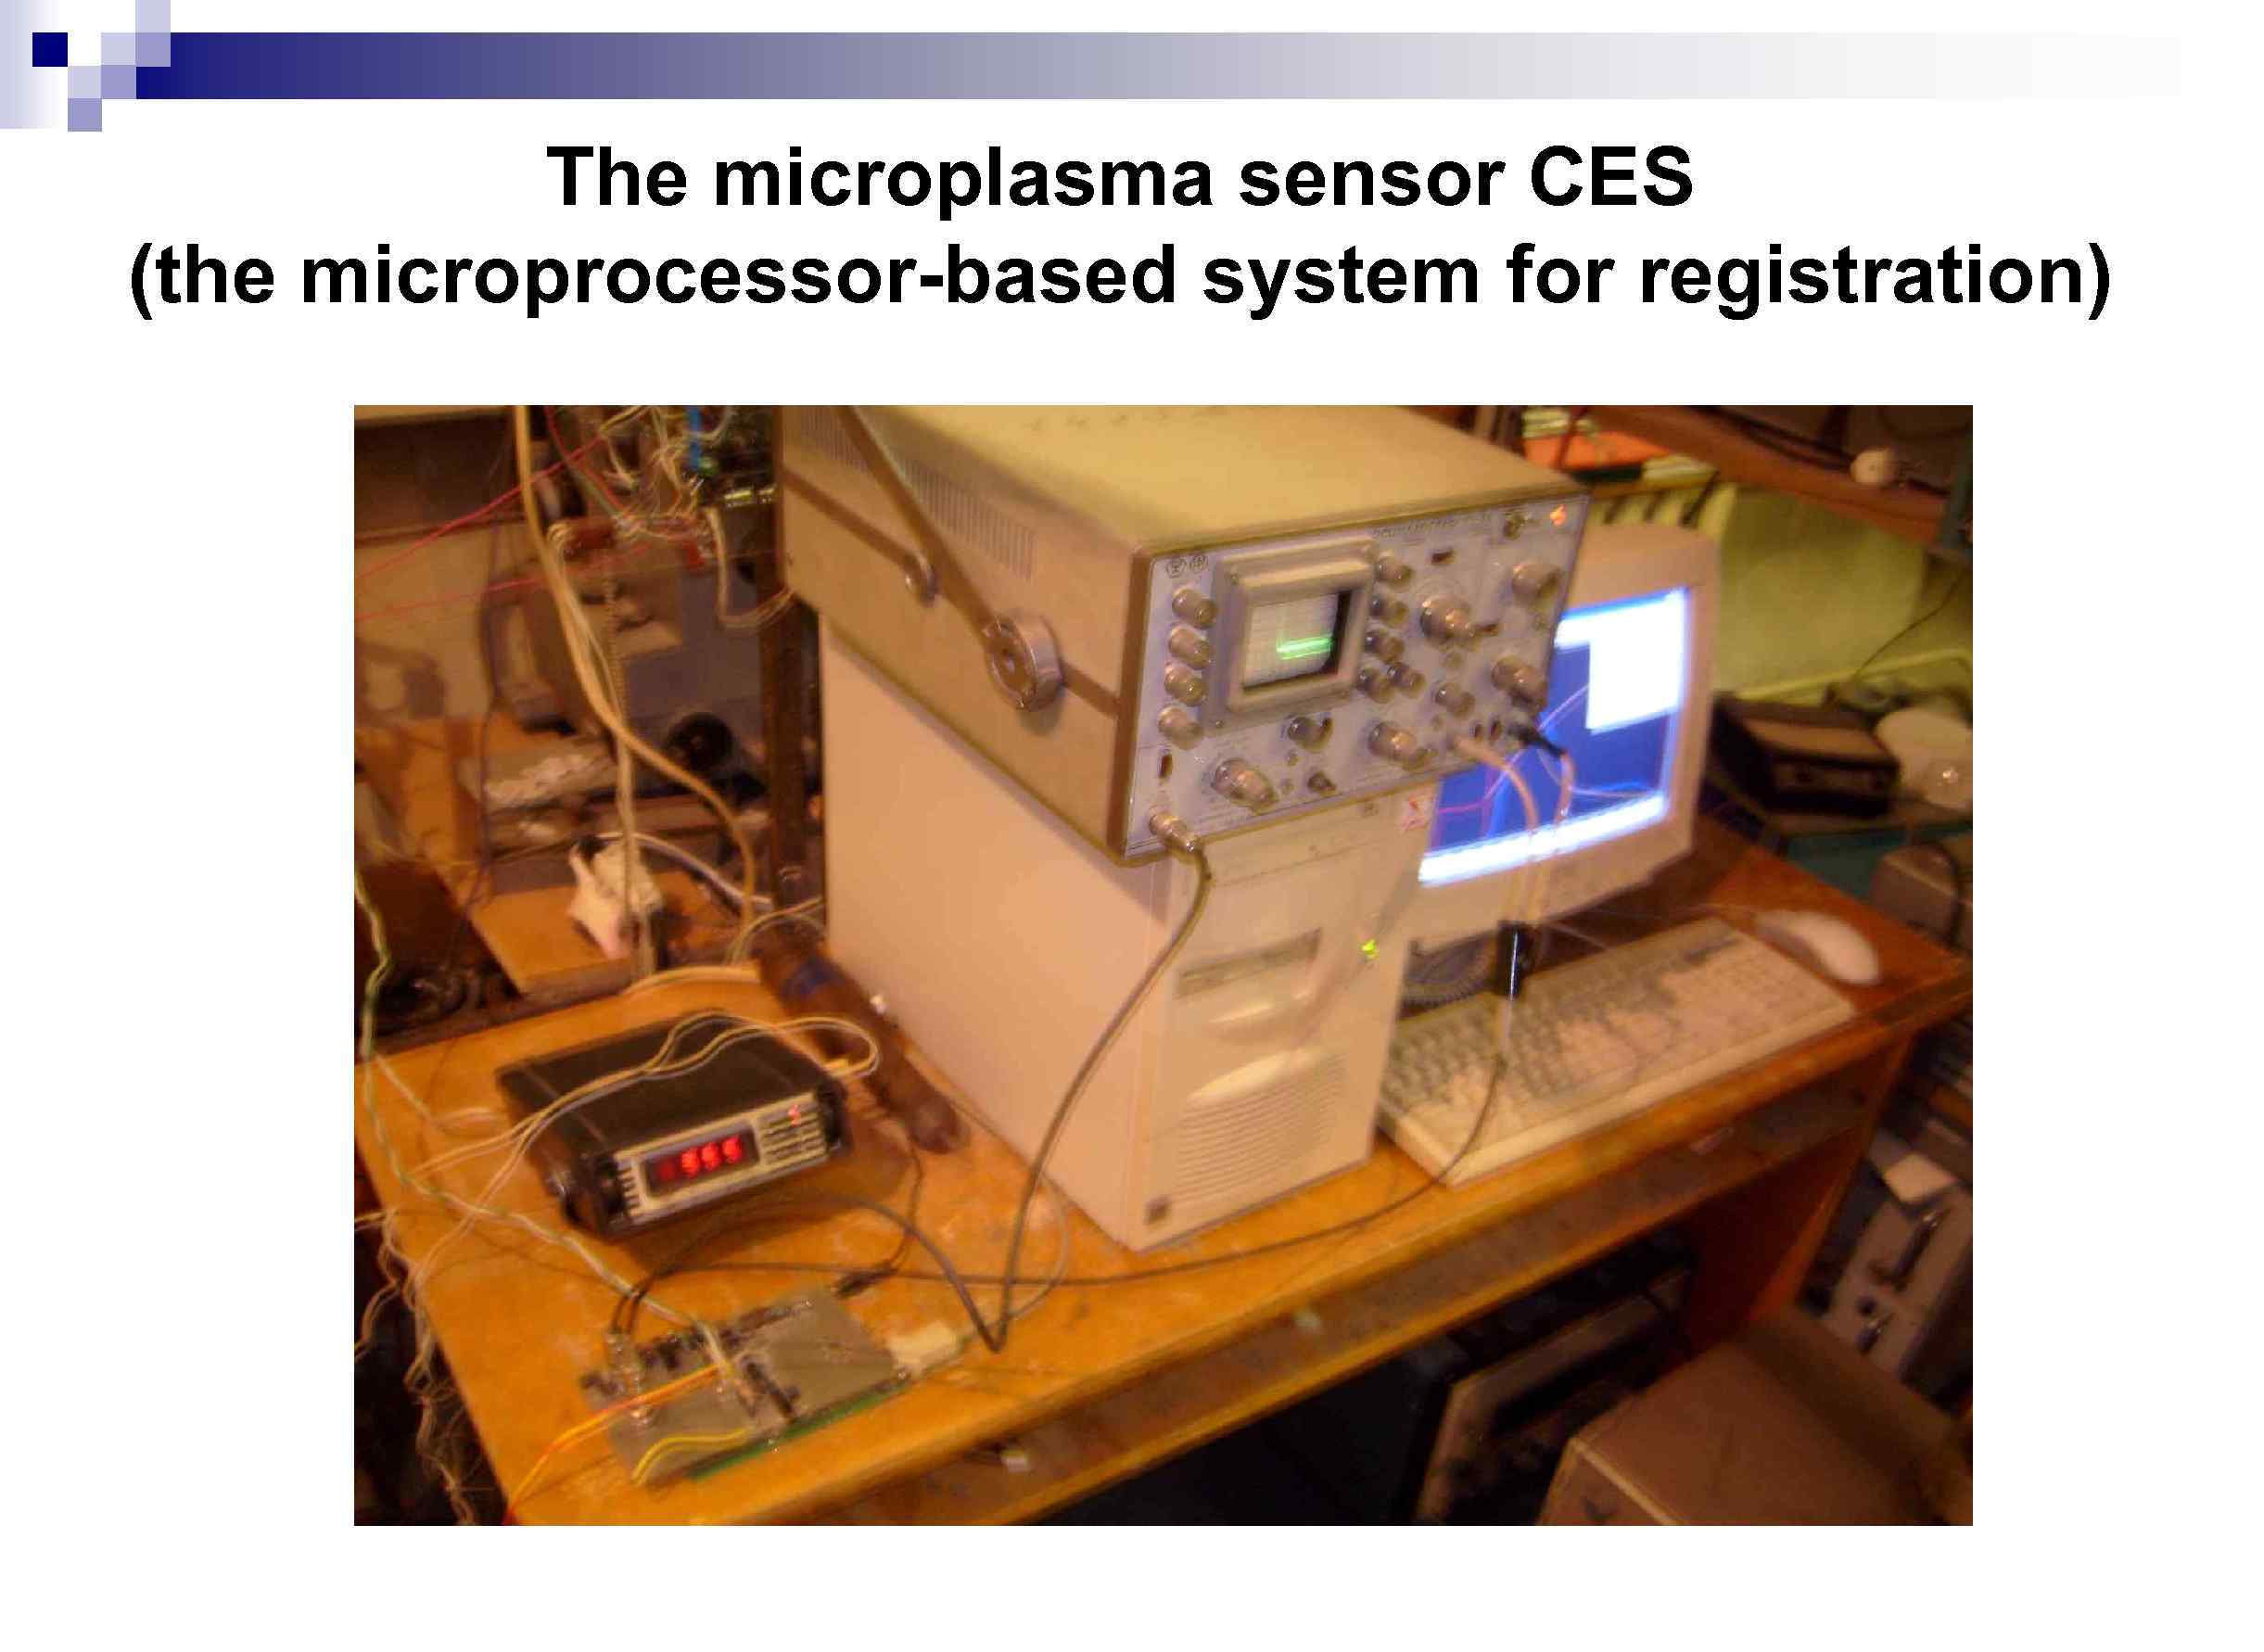 The microplasma sensor CES (the microprocessor-based system for registration) 